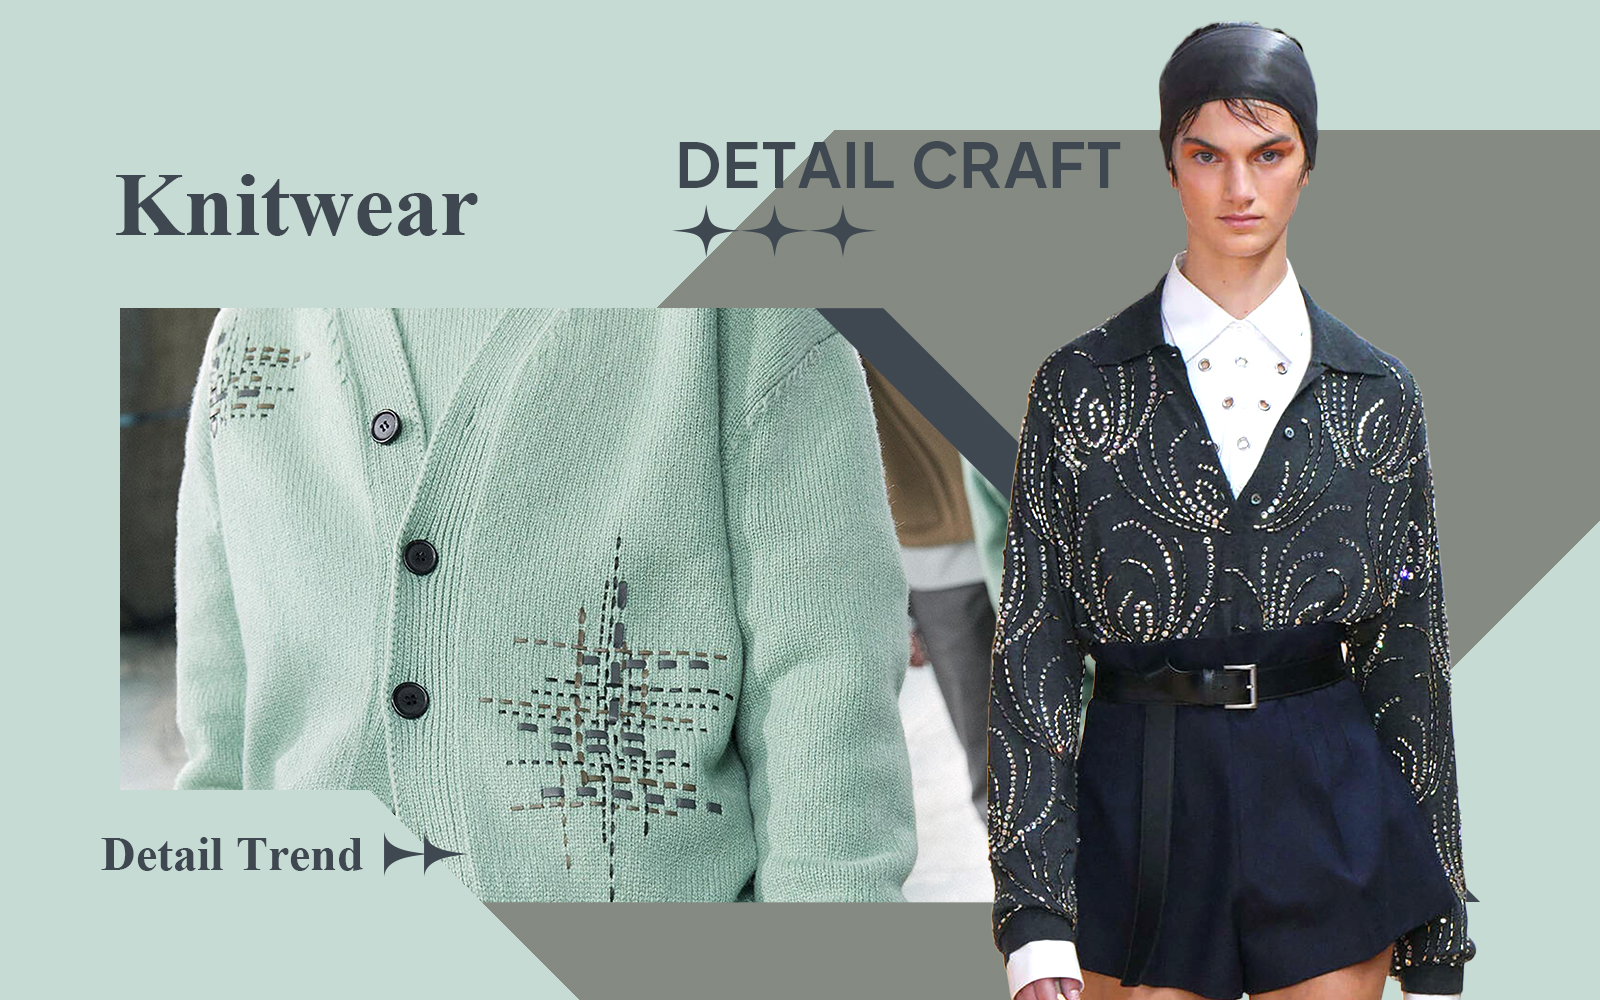 The Detail & Craft Trend for Men's Knitwear